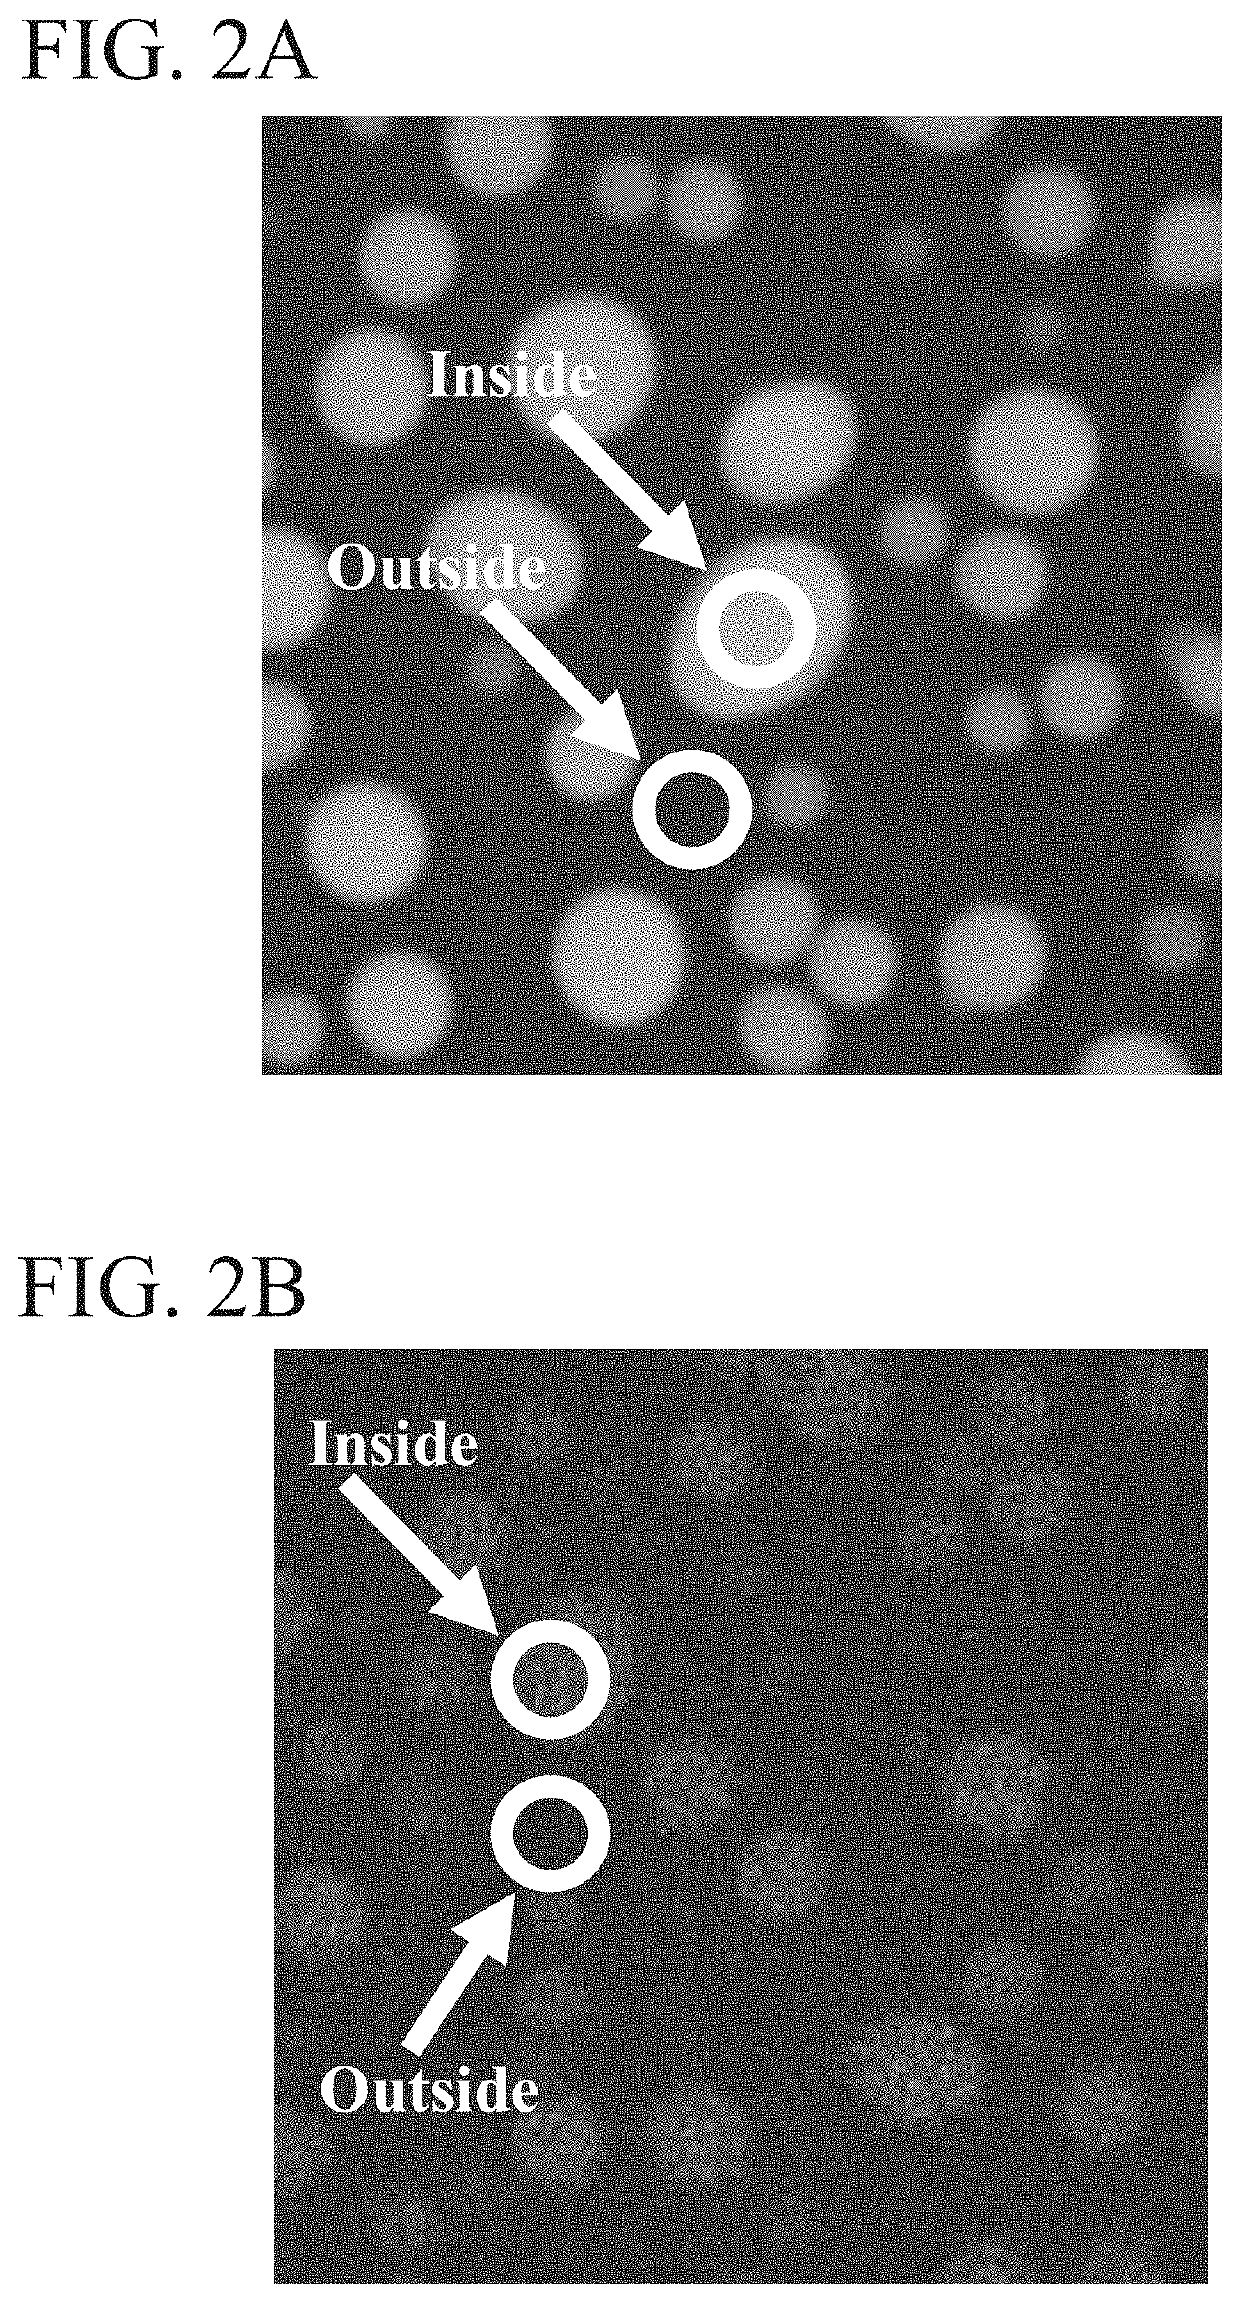 Methods of characterizing condensate-associated characteristics of compounds and uses thereof